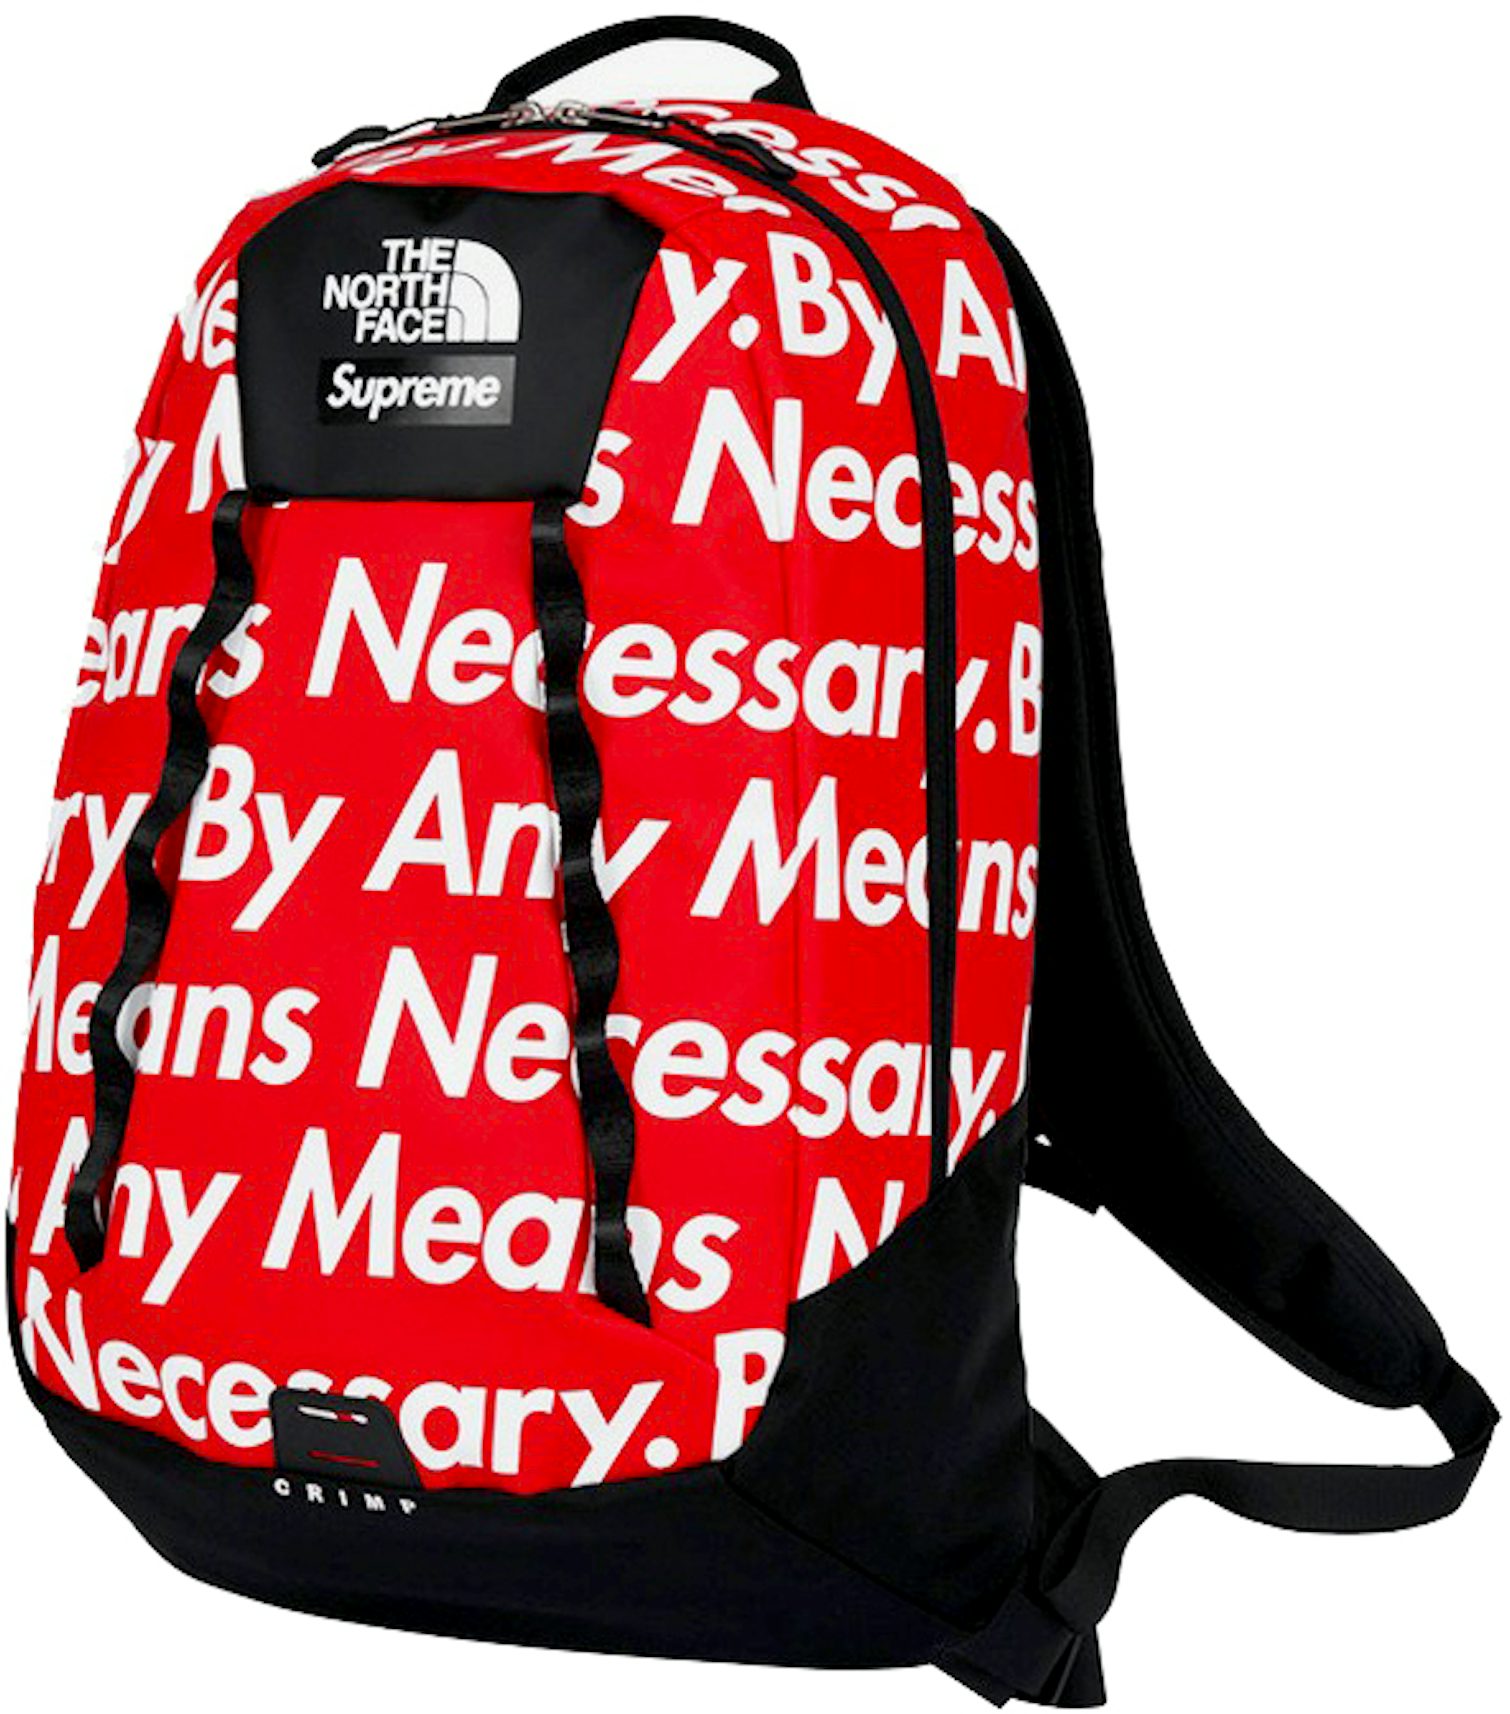 Supreme The North Face Faux Fur Backpack Red